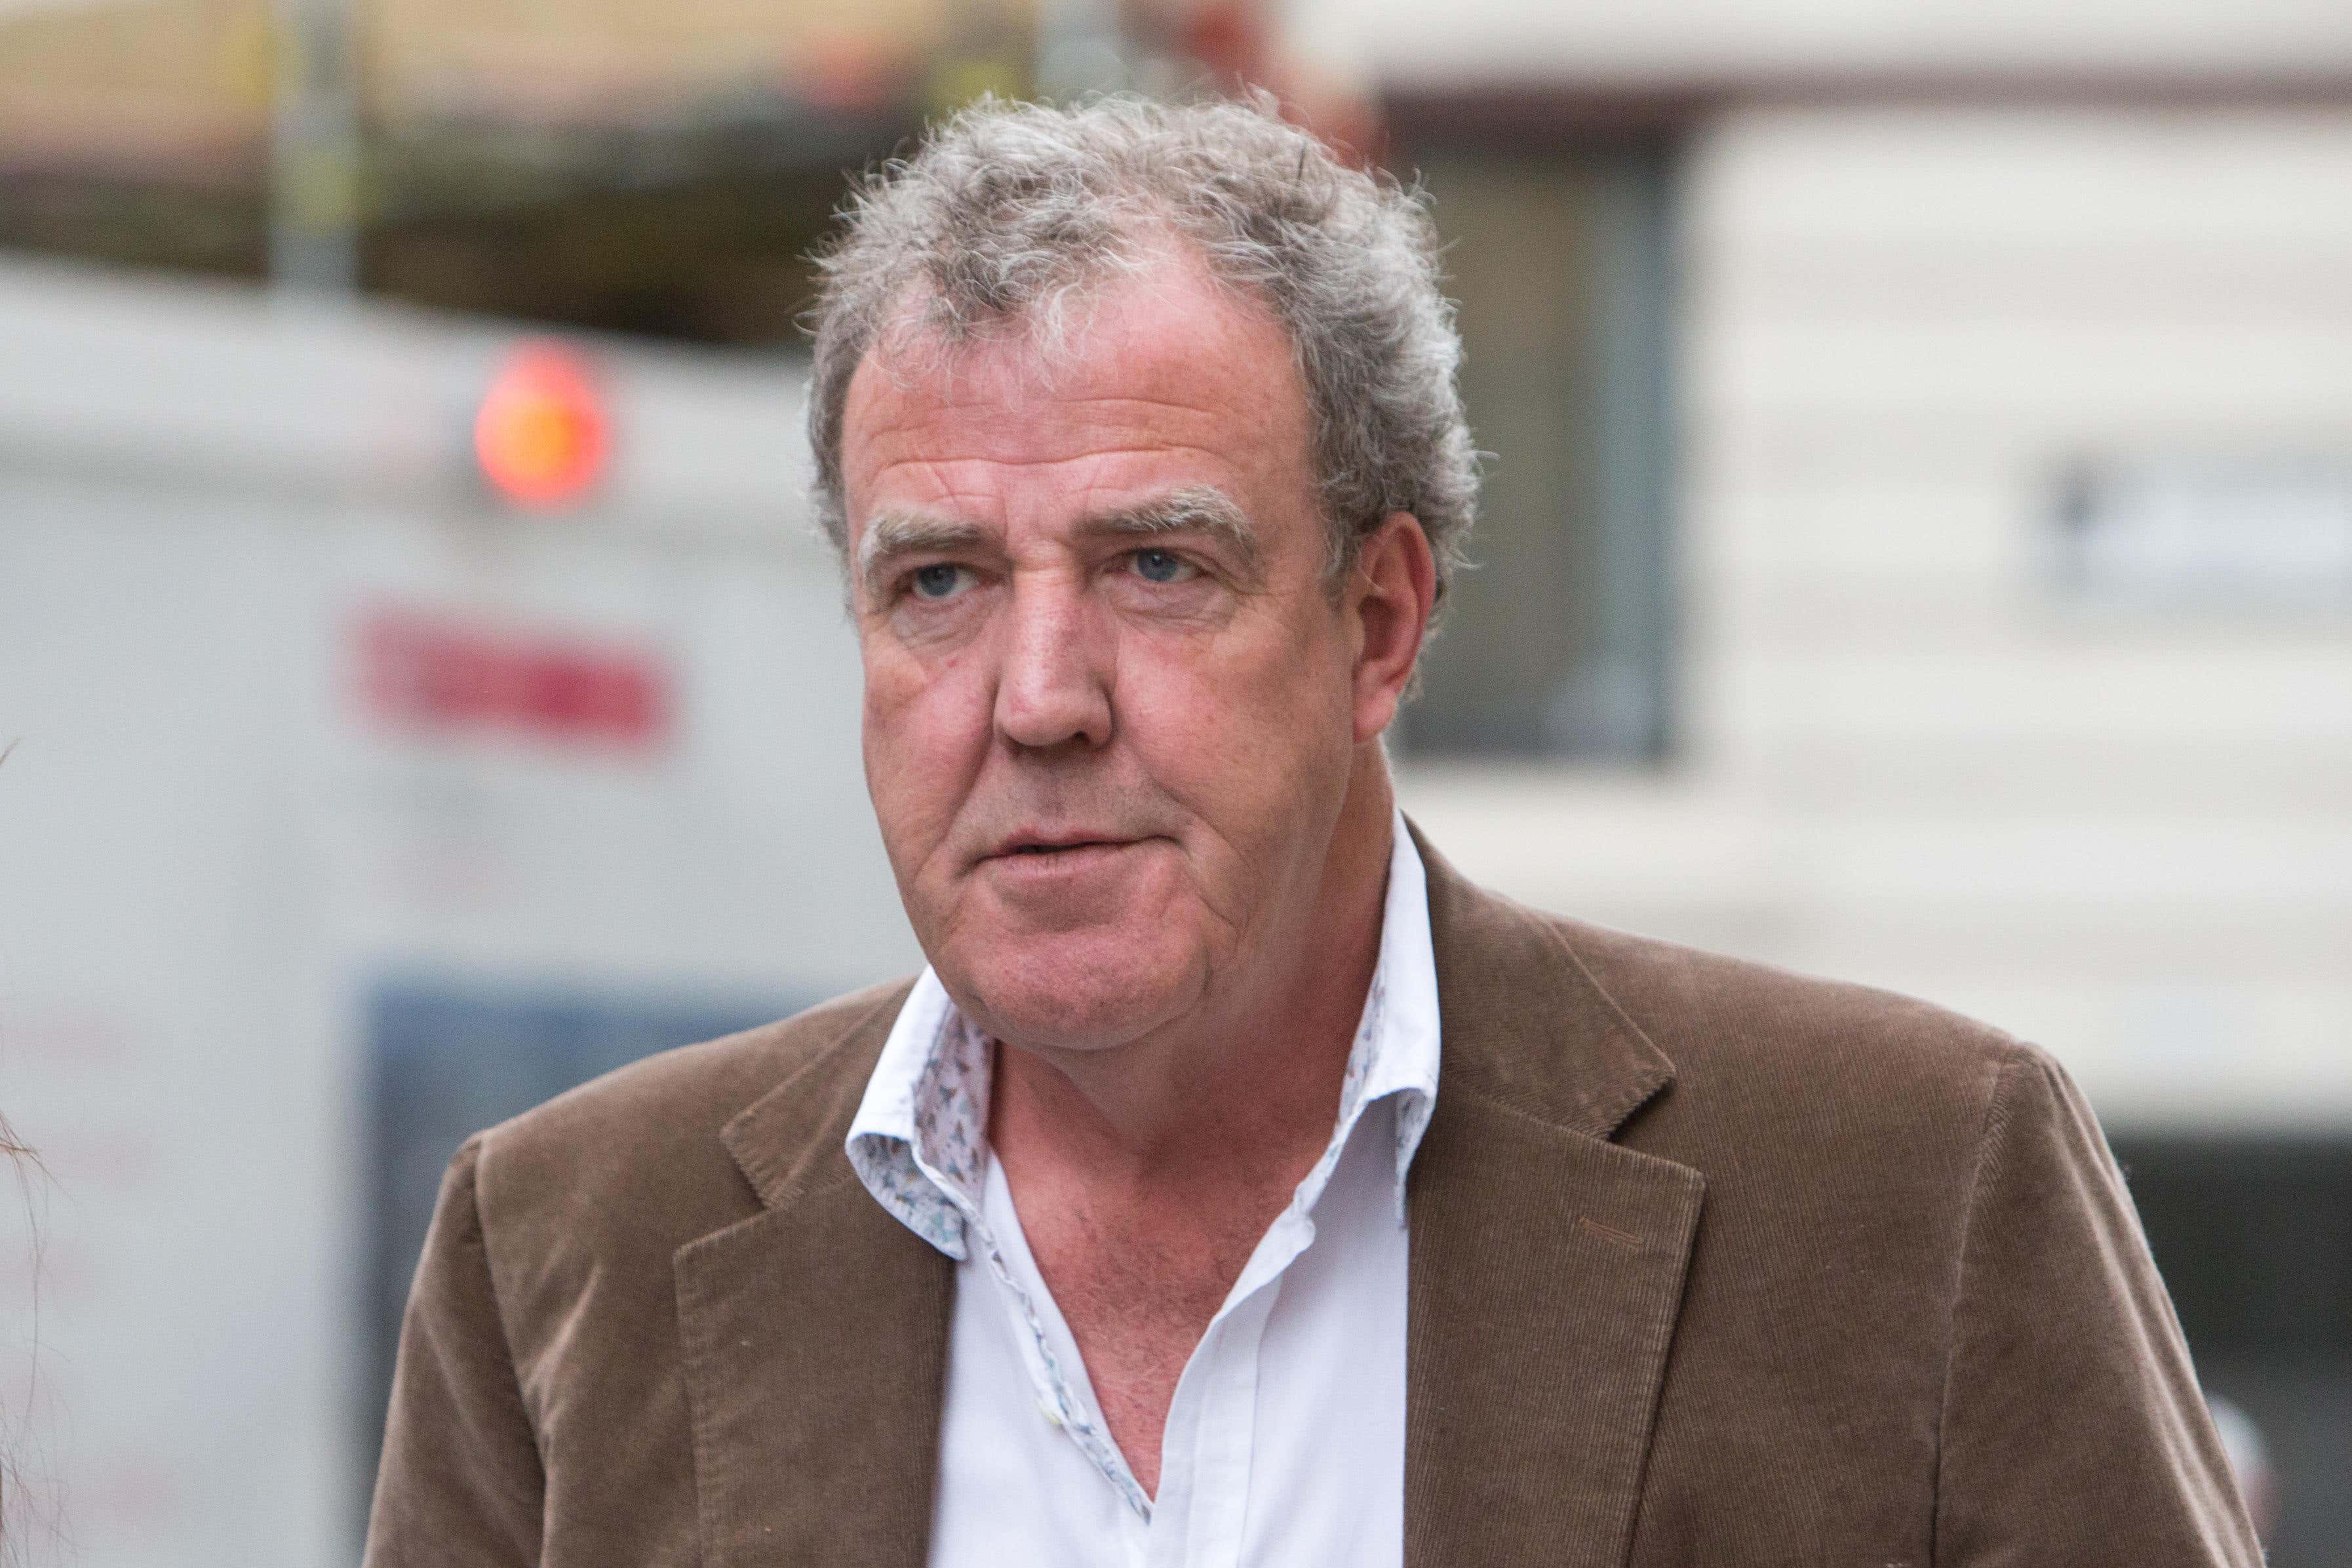 Jeremy Clarkson is one of the high-profile figures whose identities have been misused by scammers